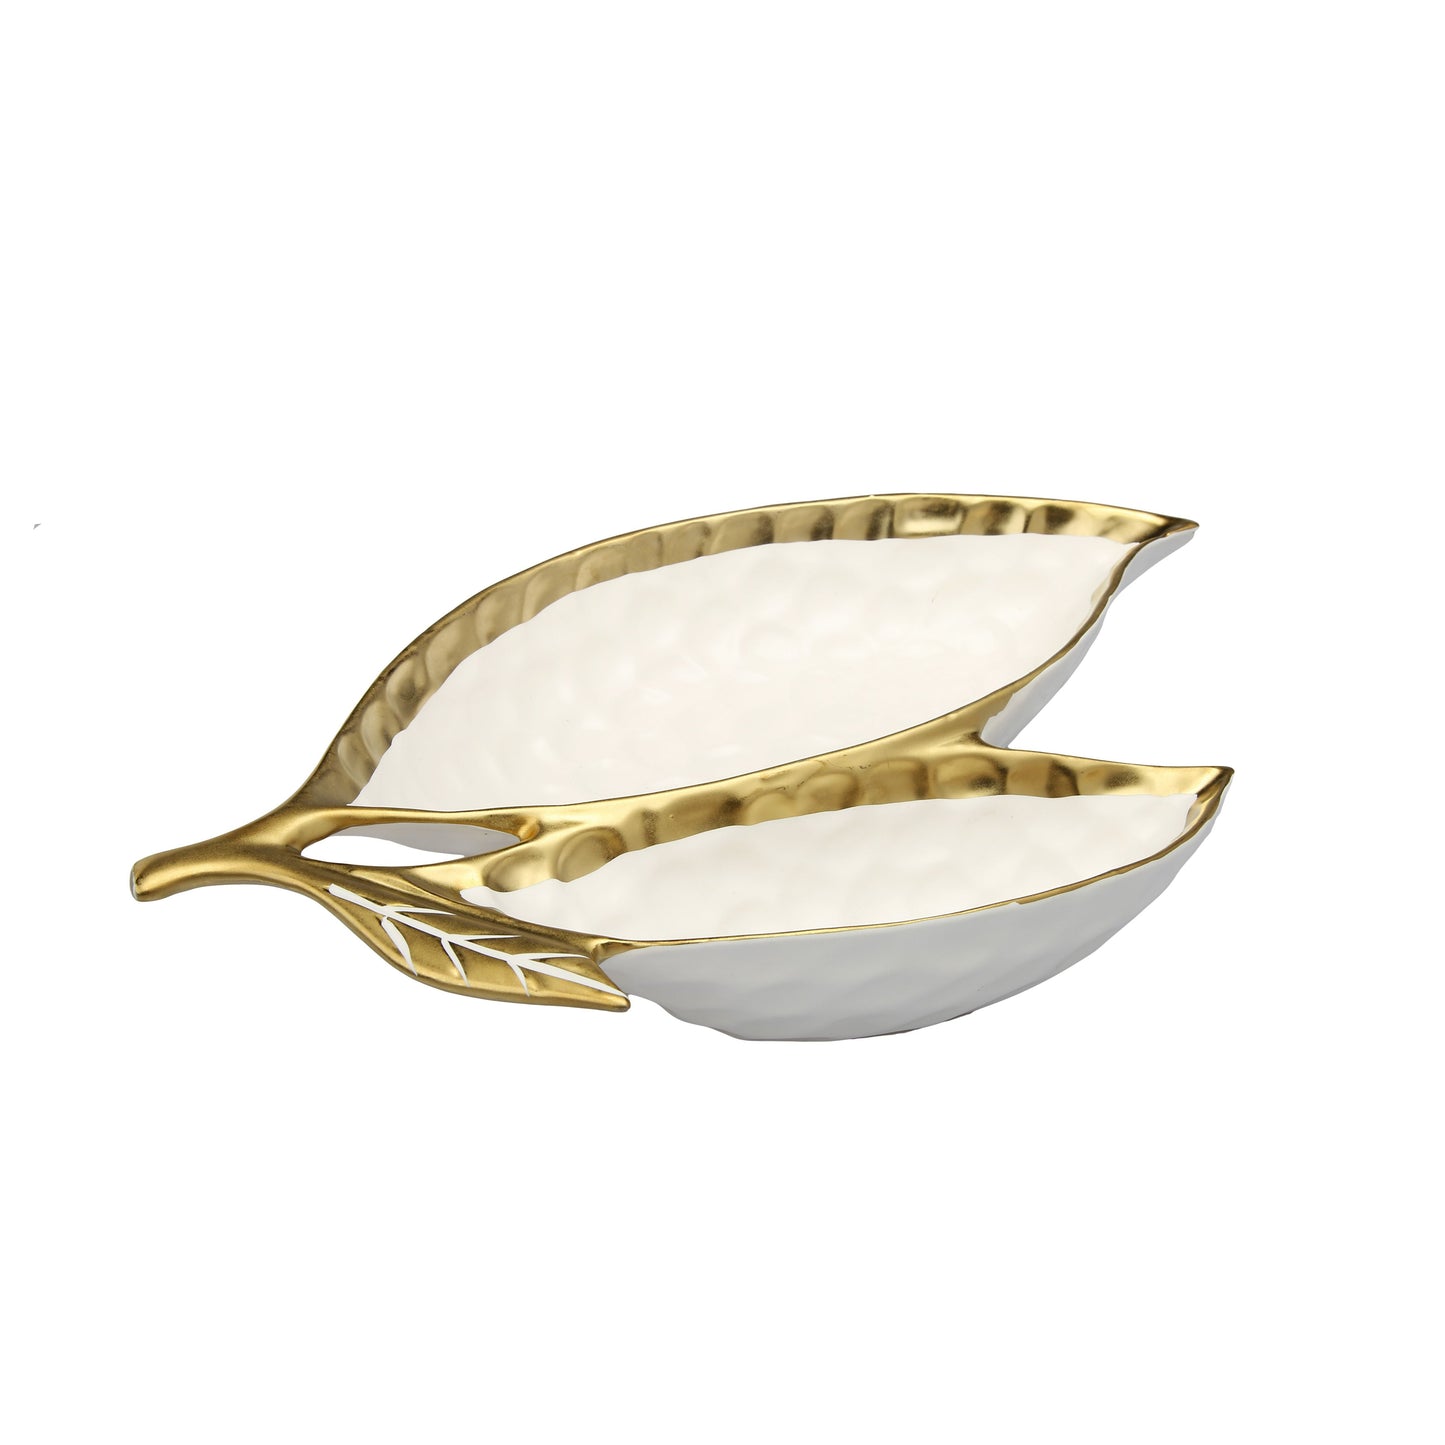 Classic Touch White Porcelain Leaf Relish Dish With Gold Rim, 15"